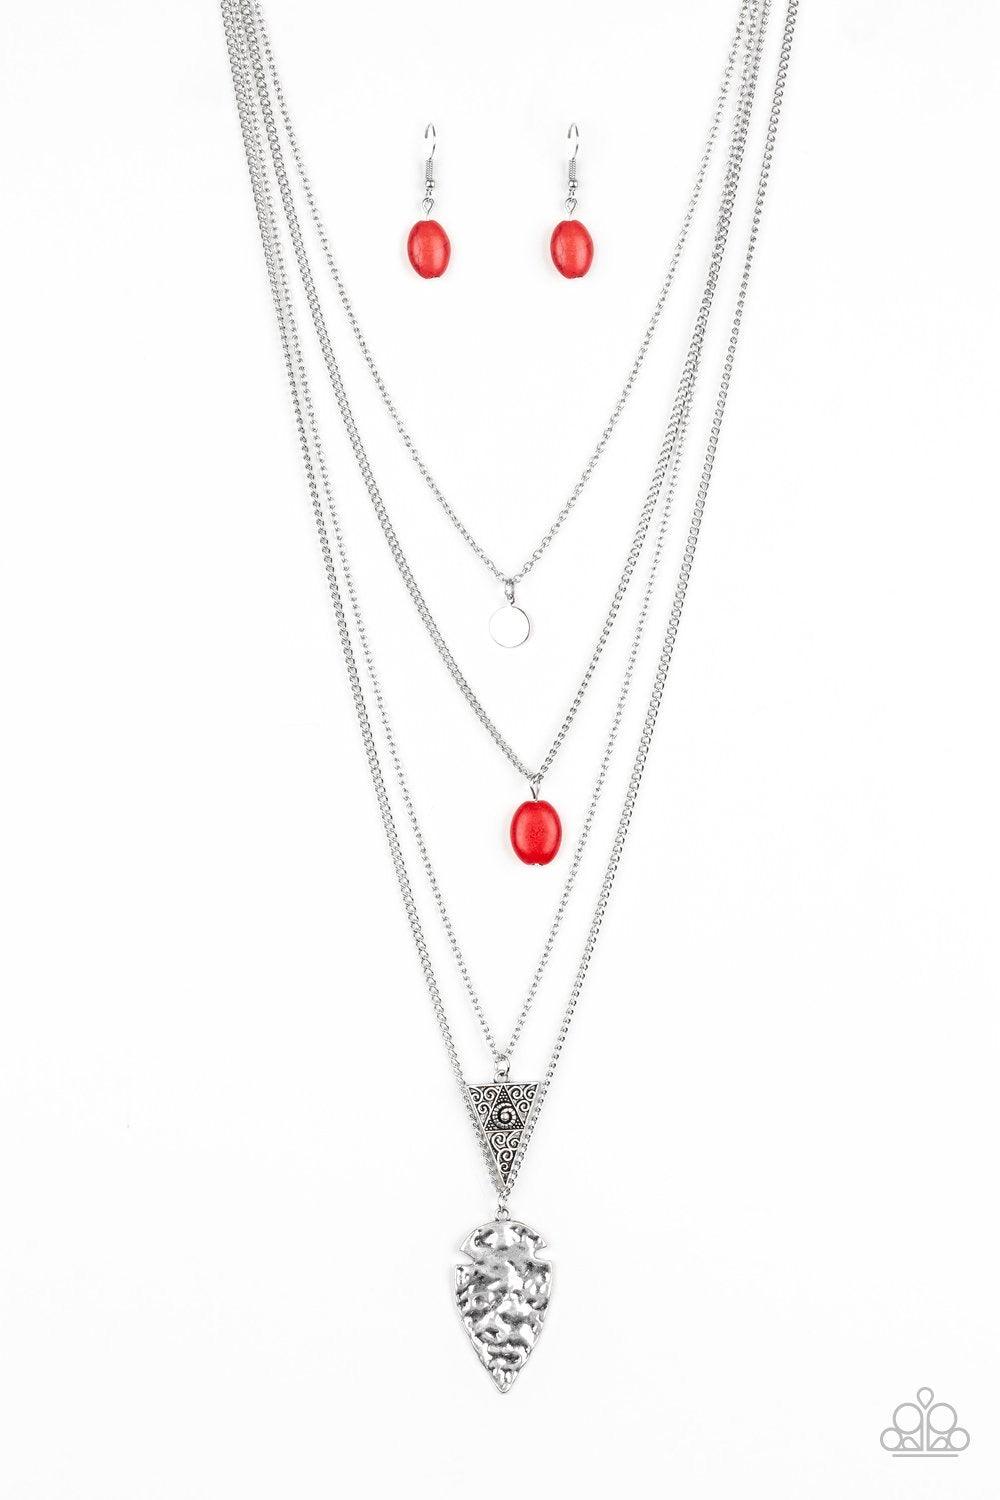 Paparazzi Accessories Grounded in ARTIFACT - Red Glistening silver chains drape across the chest, creating four shimmery layers. A dainty silver disc swings from the uppermost layer above a fiery red stone, ornate triangular frame, and hammered silver arr